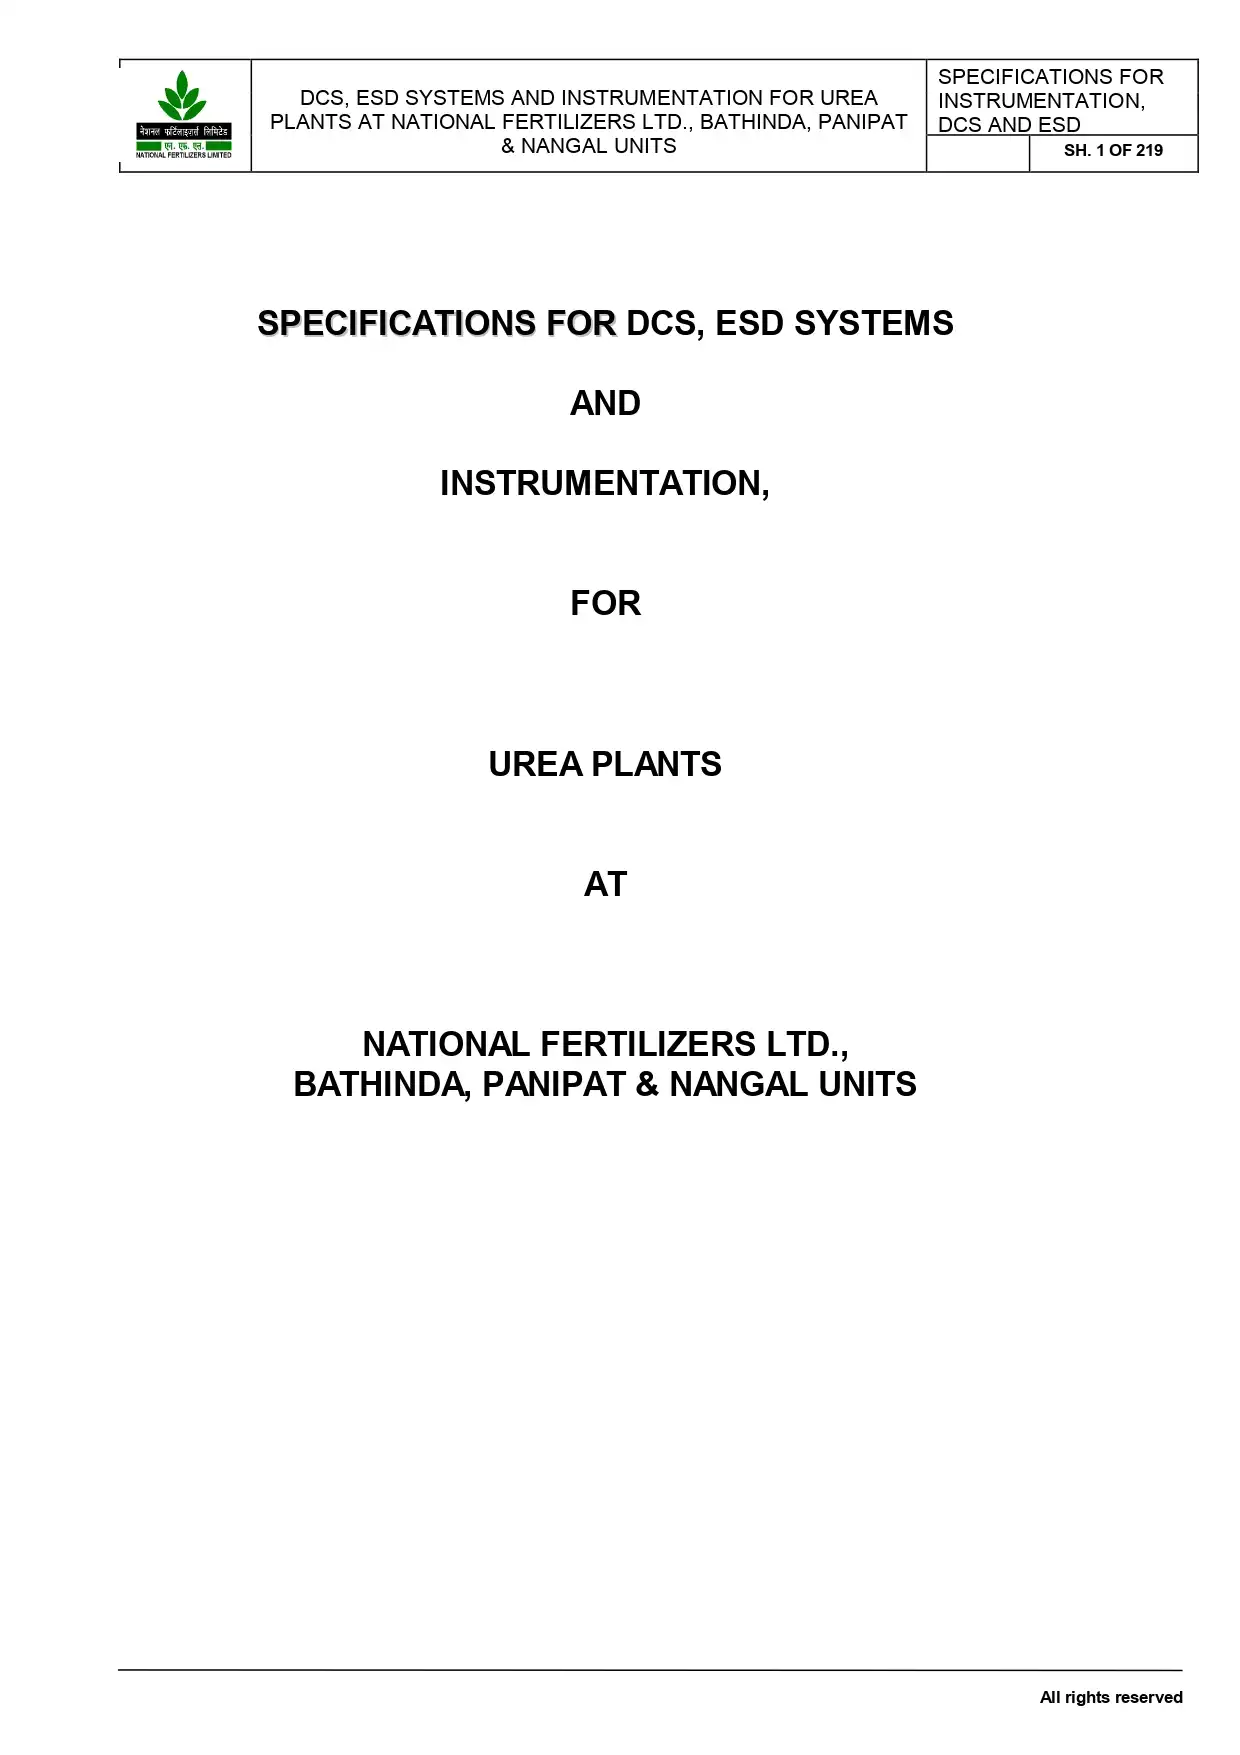 Specifications for DCS, ESD Systems and Instrumentation for Urea Plants at National Fertilizers LTD., Bathinda, Panipat & Nangal Units